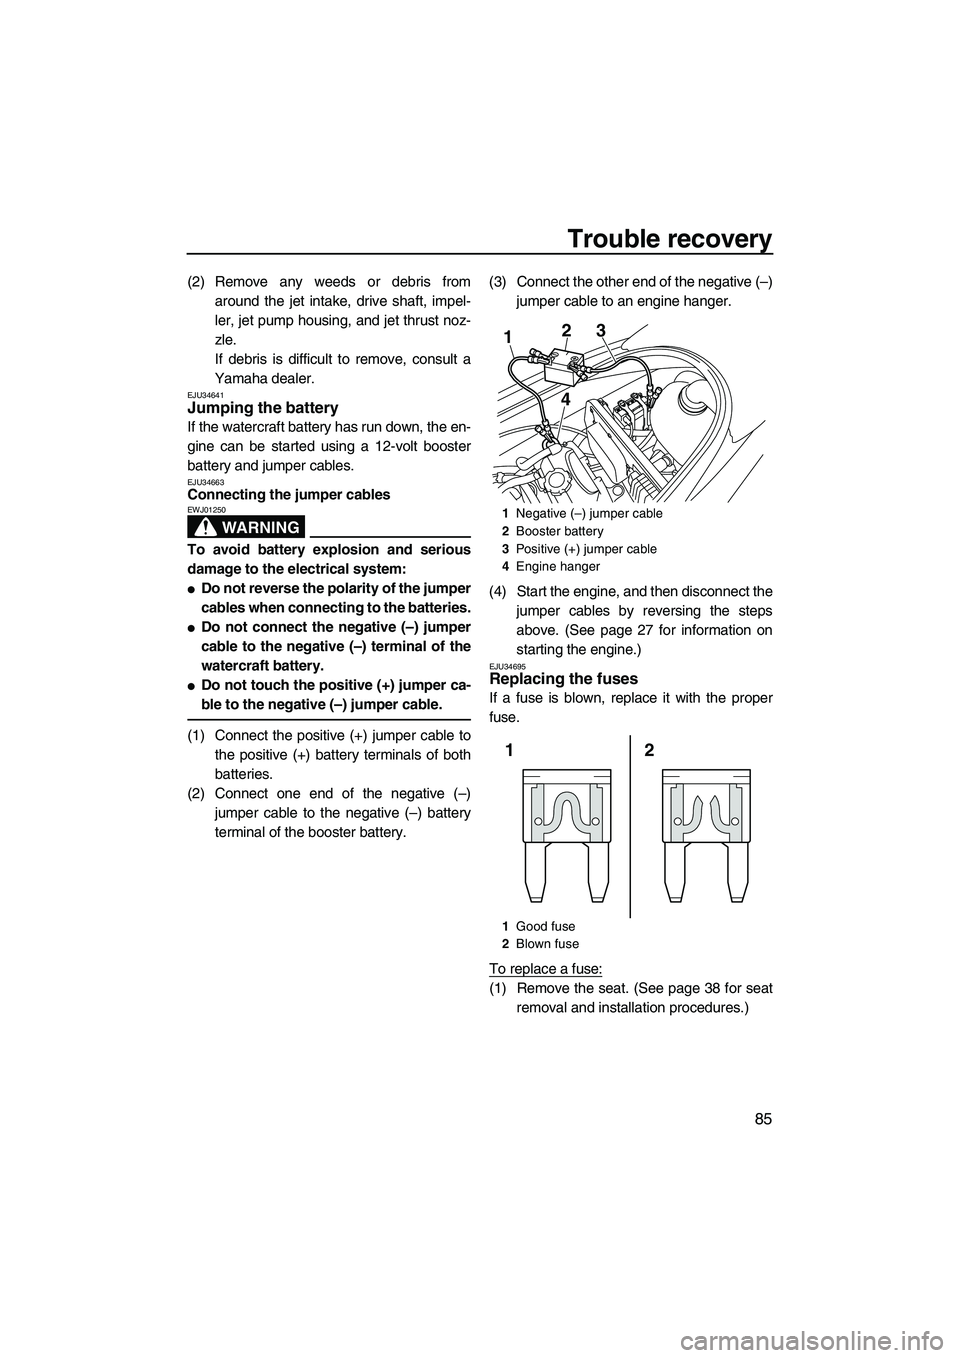 YAMAHA VX SPORT 2013  Owners Manual Trouble recovery
85
(2) Remove any weeds or debris fromaround the jet intake, drive shaft, impel-
ler, jet pump housing, and jet thrust noz-
zle.
If debris is difficult to remove, consult a
Yamaha dea